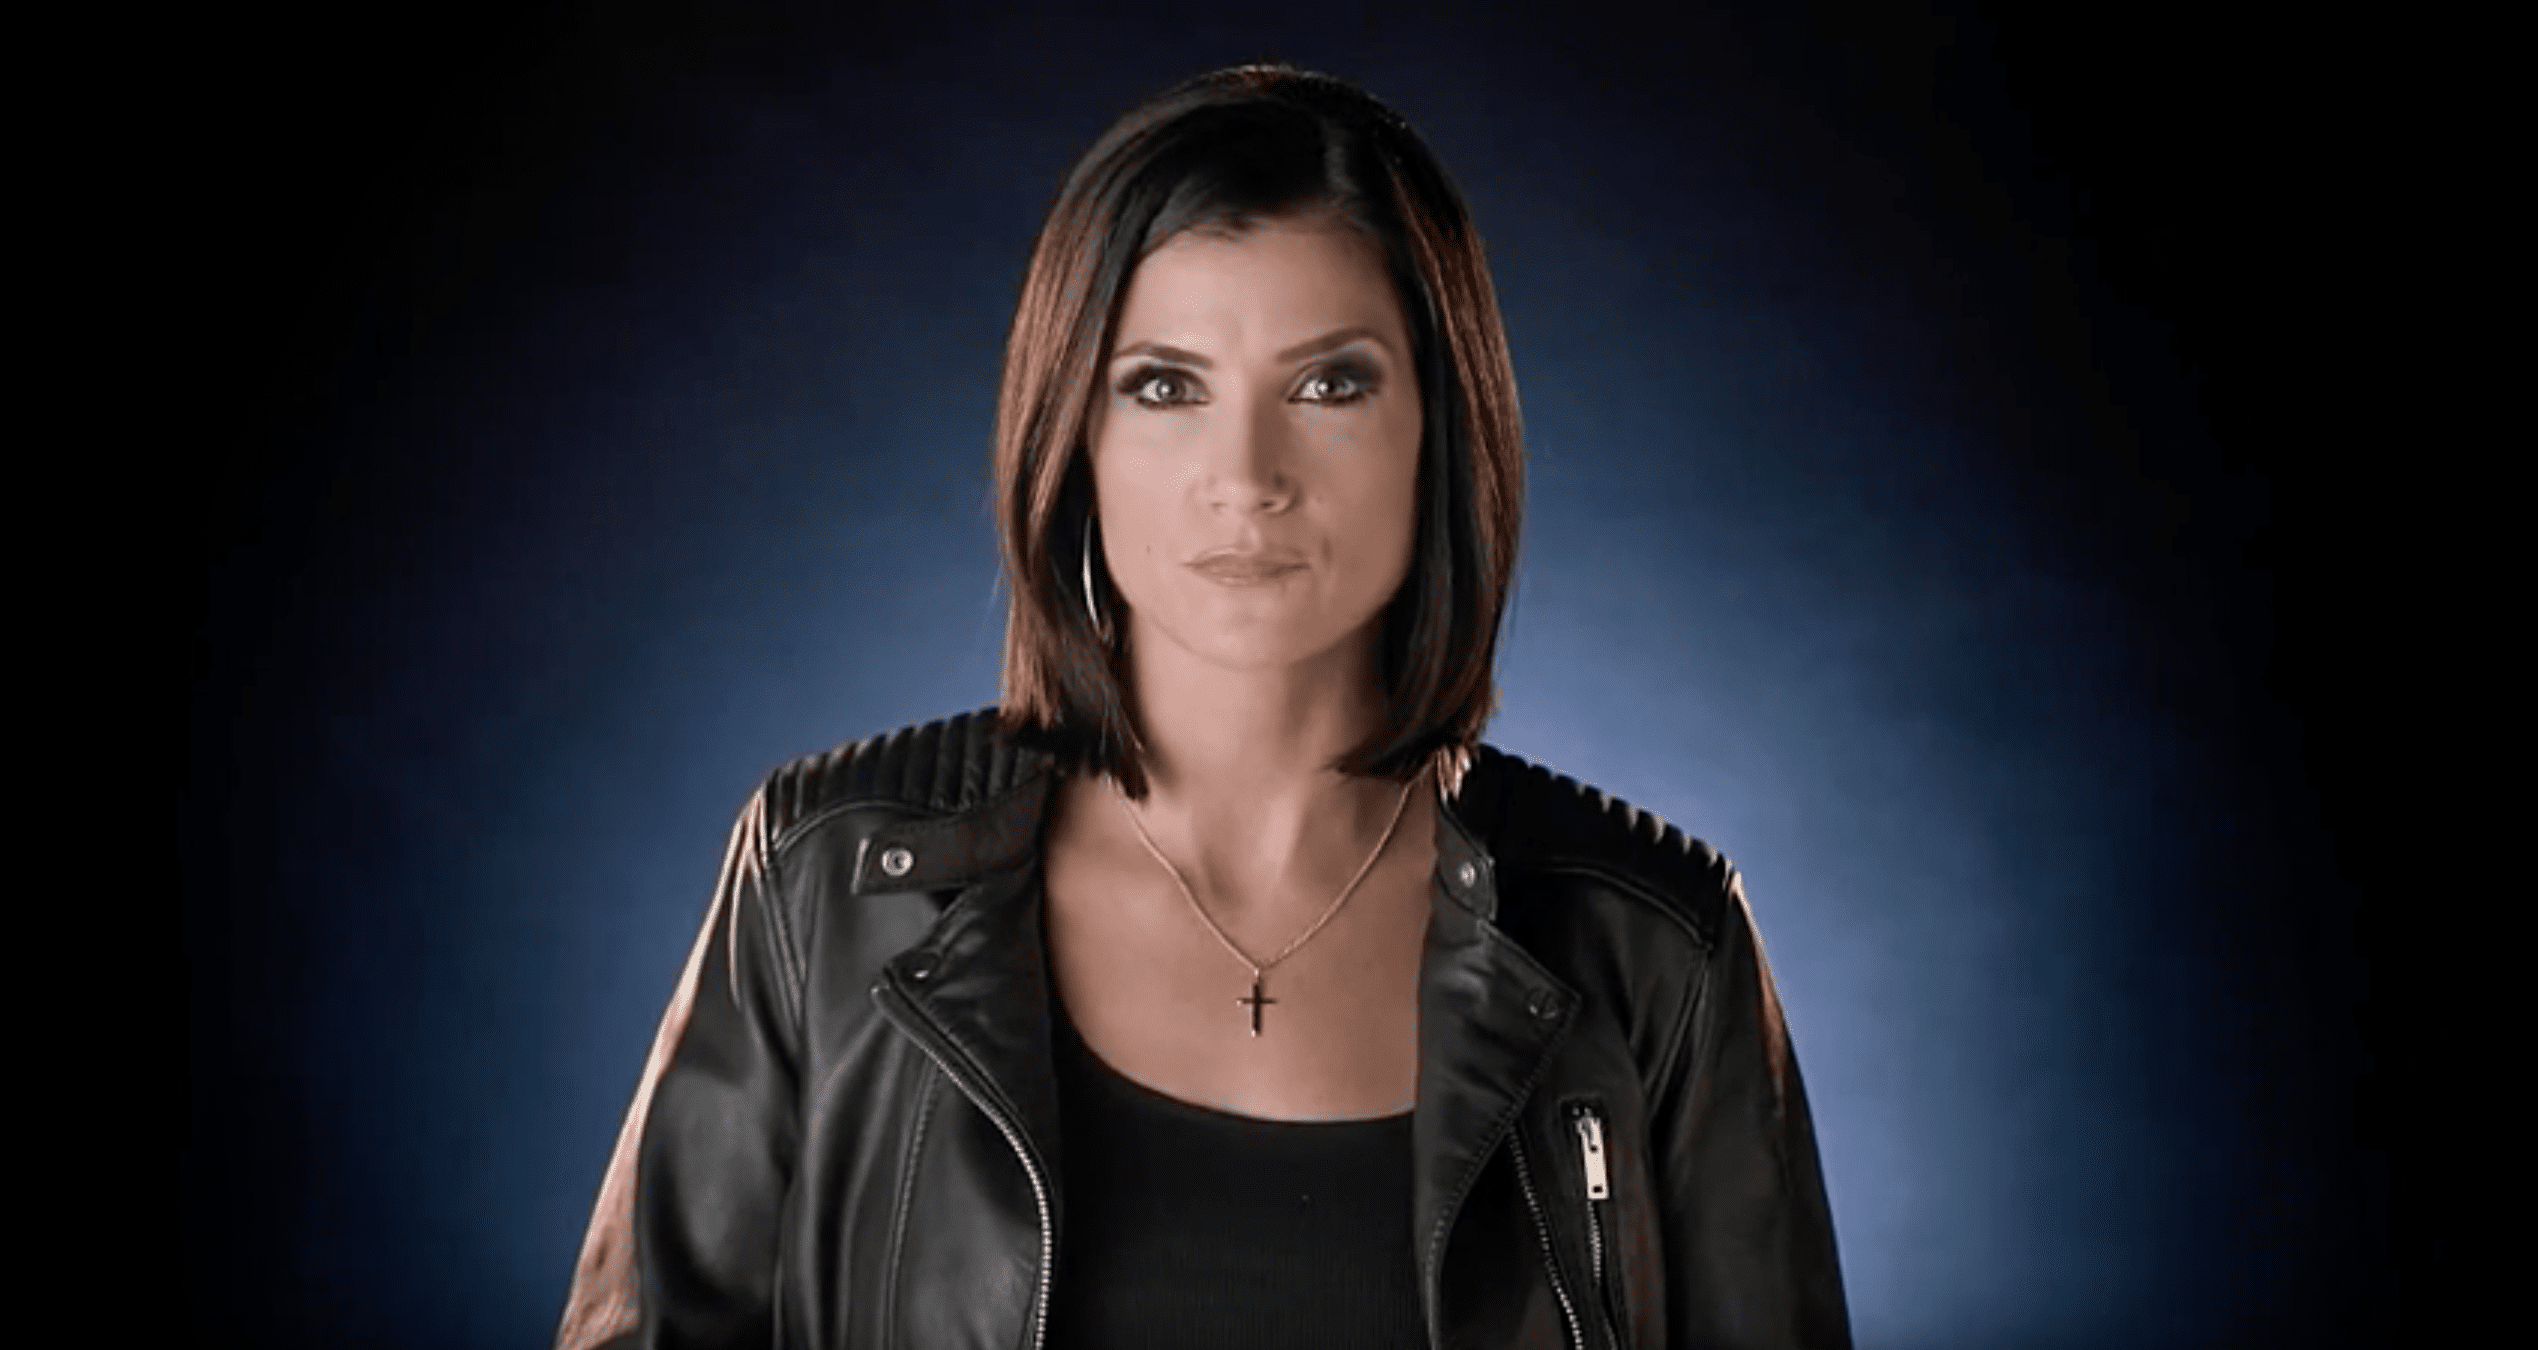 Moms Like Me" New NRA Ad Featuring Dana Loesch.